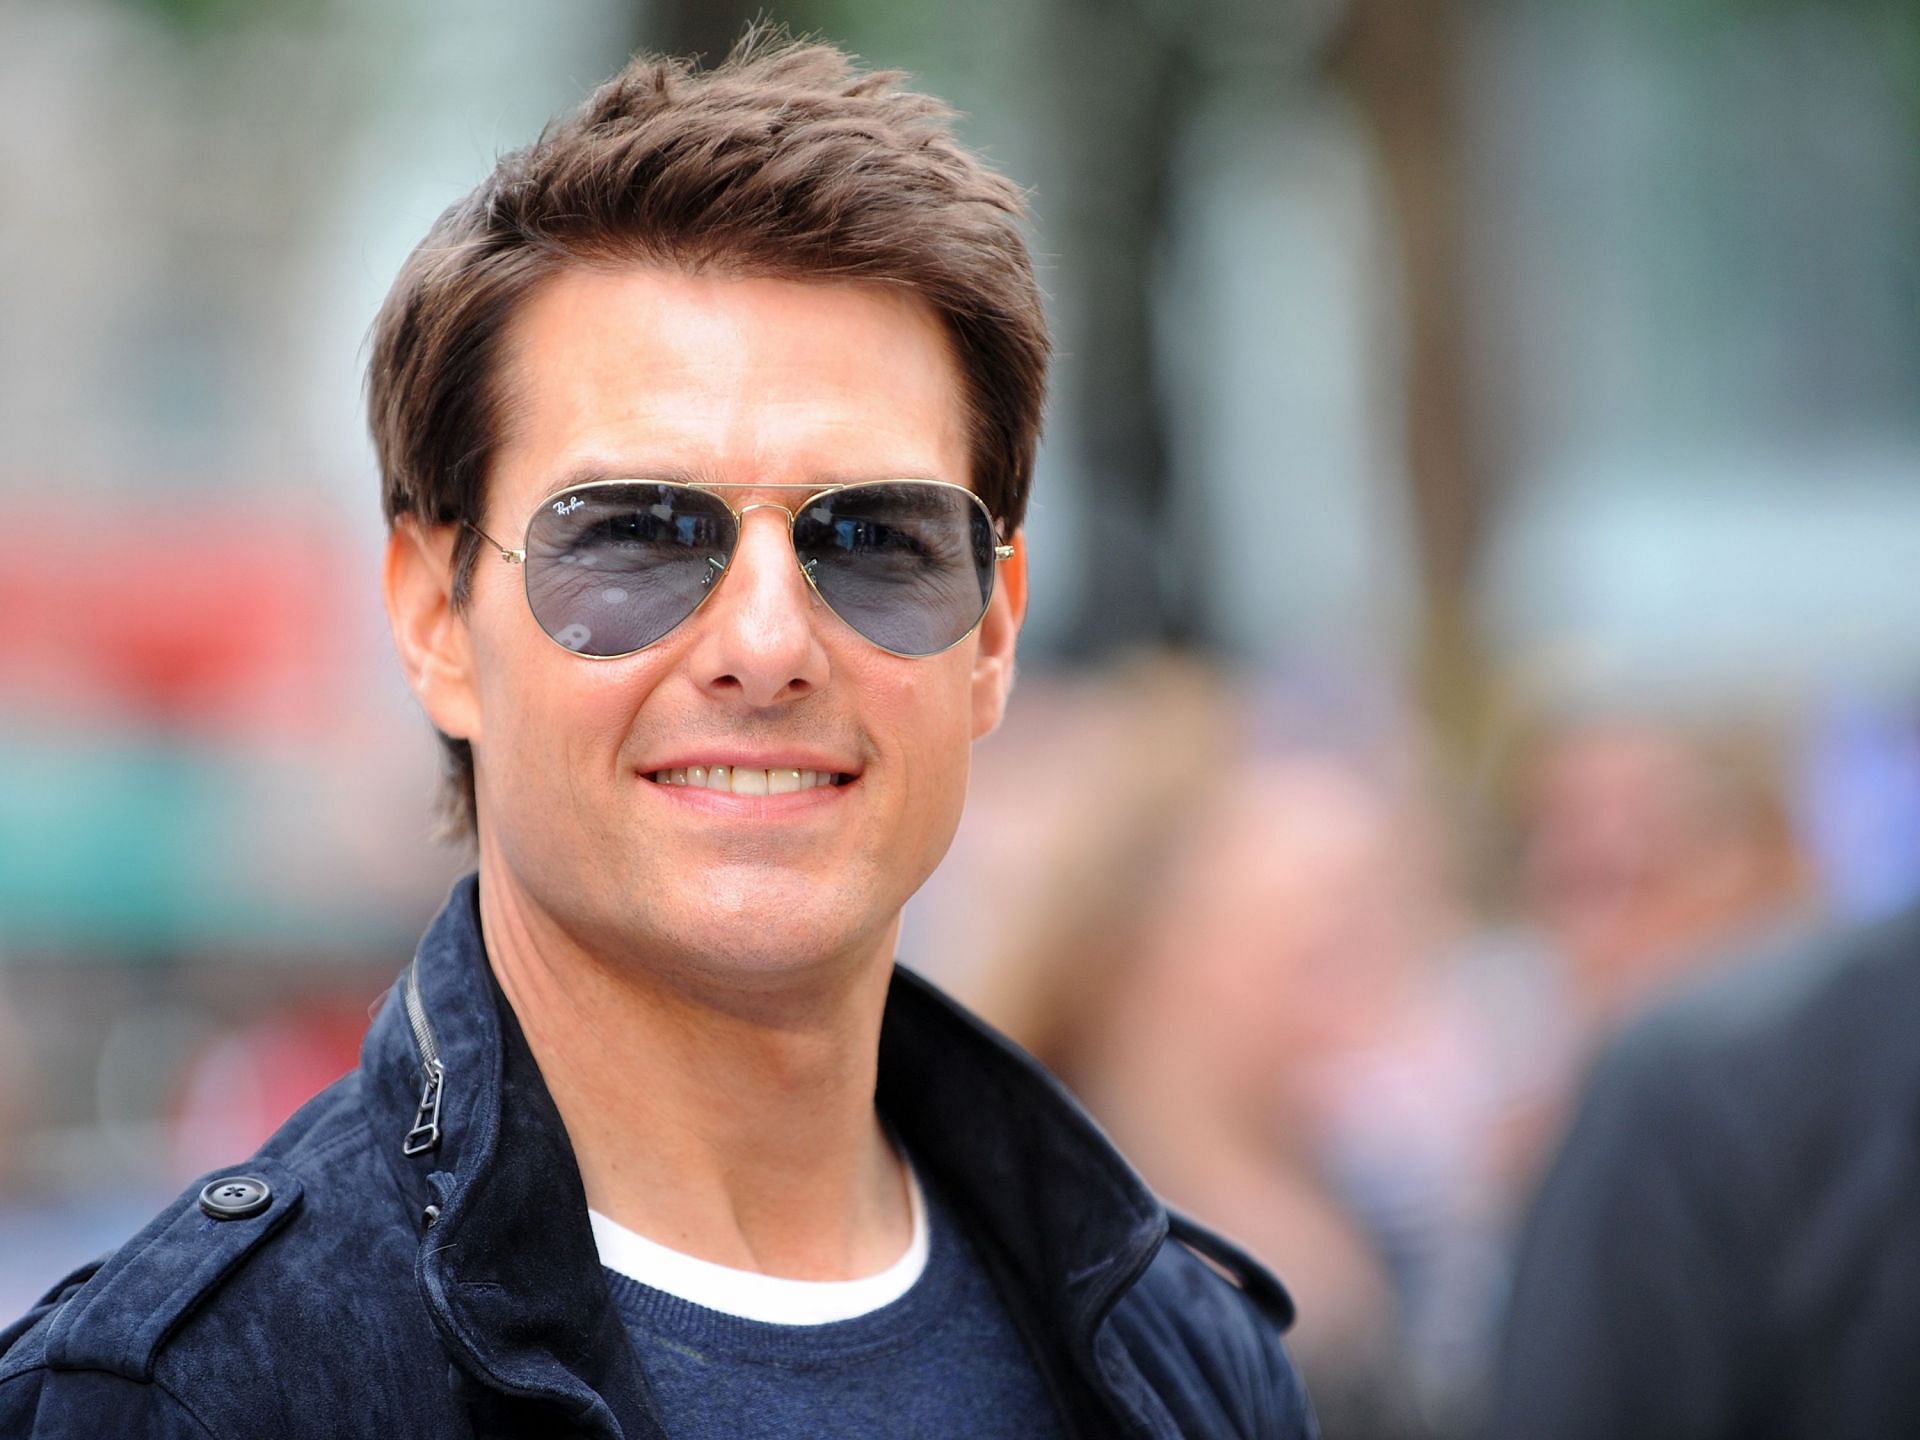 Tom Cruise (Image via Getty Images)